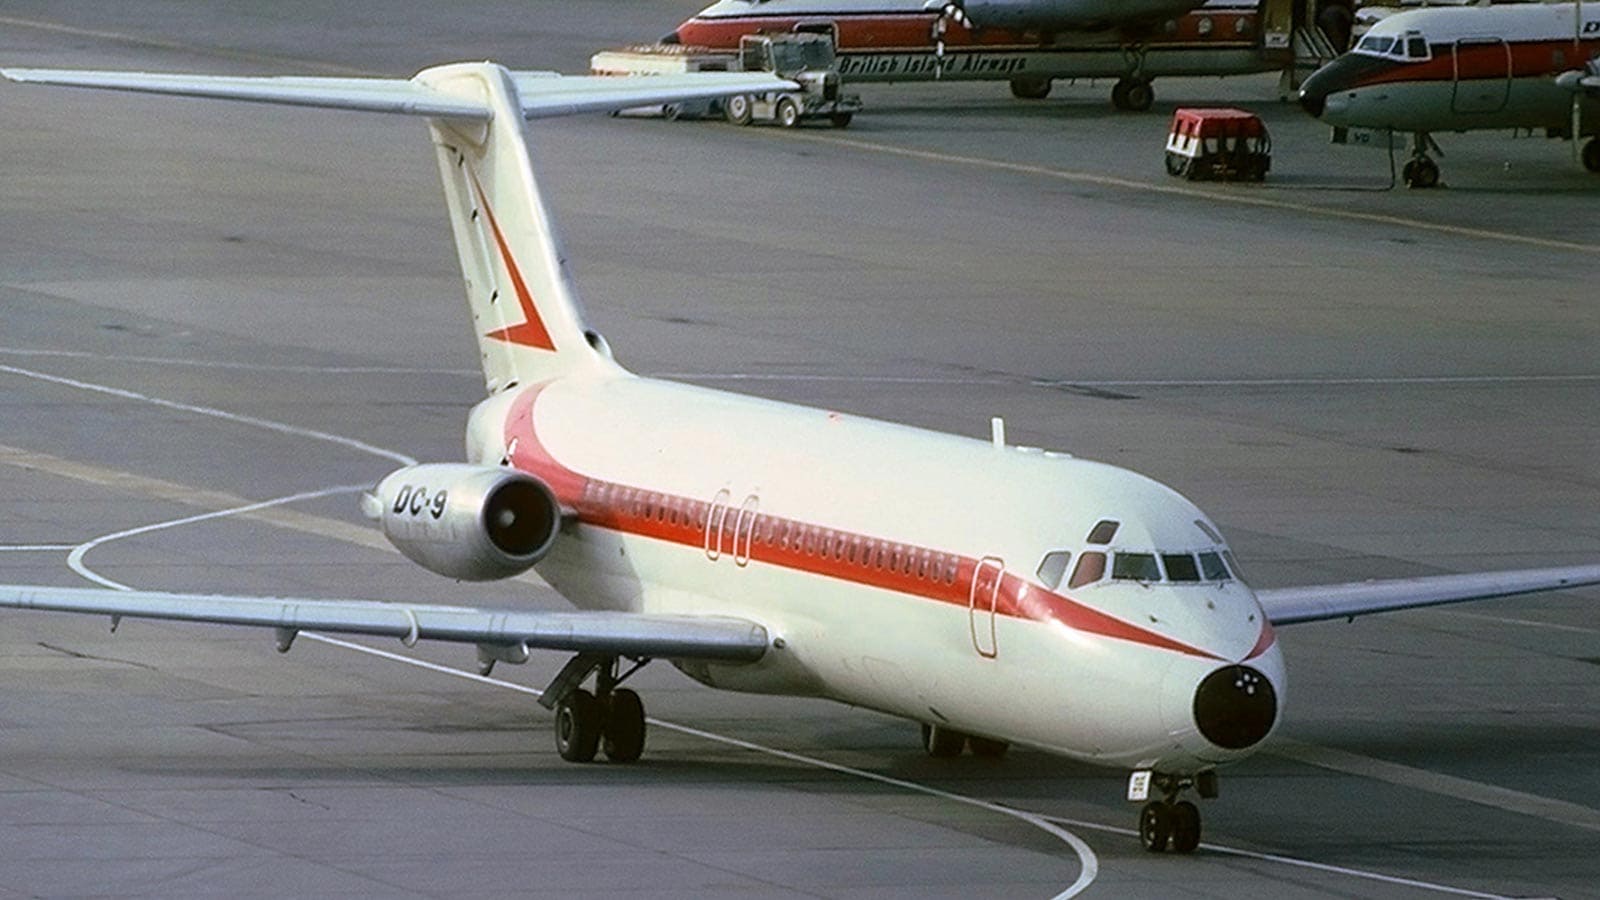 What is the top speed of the dc9?